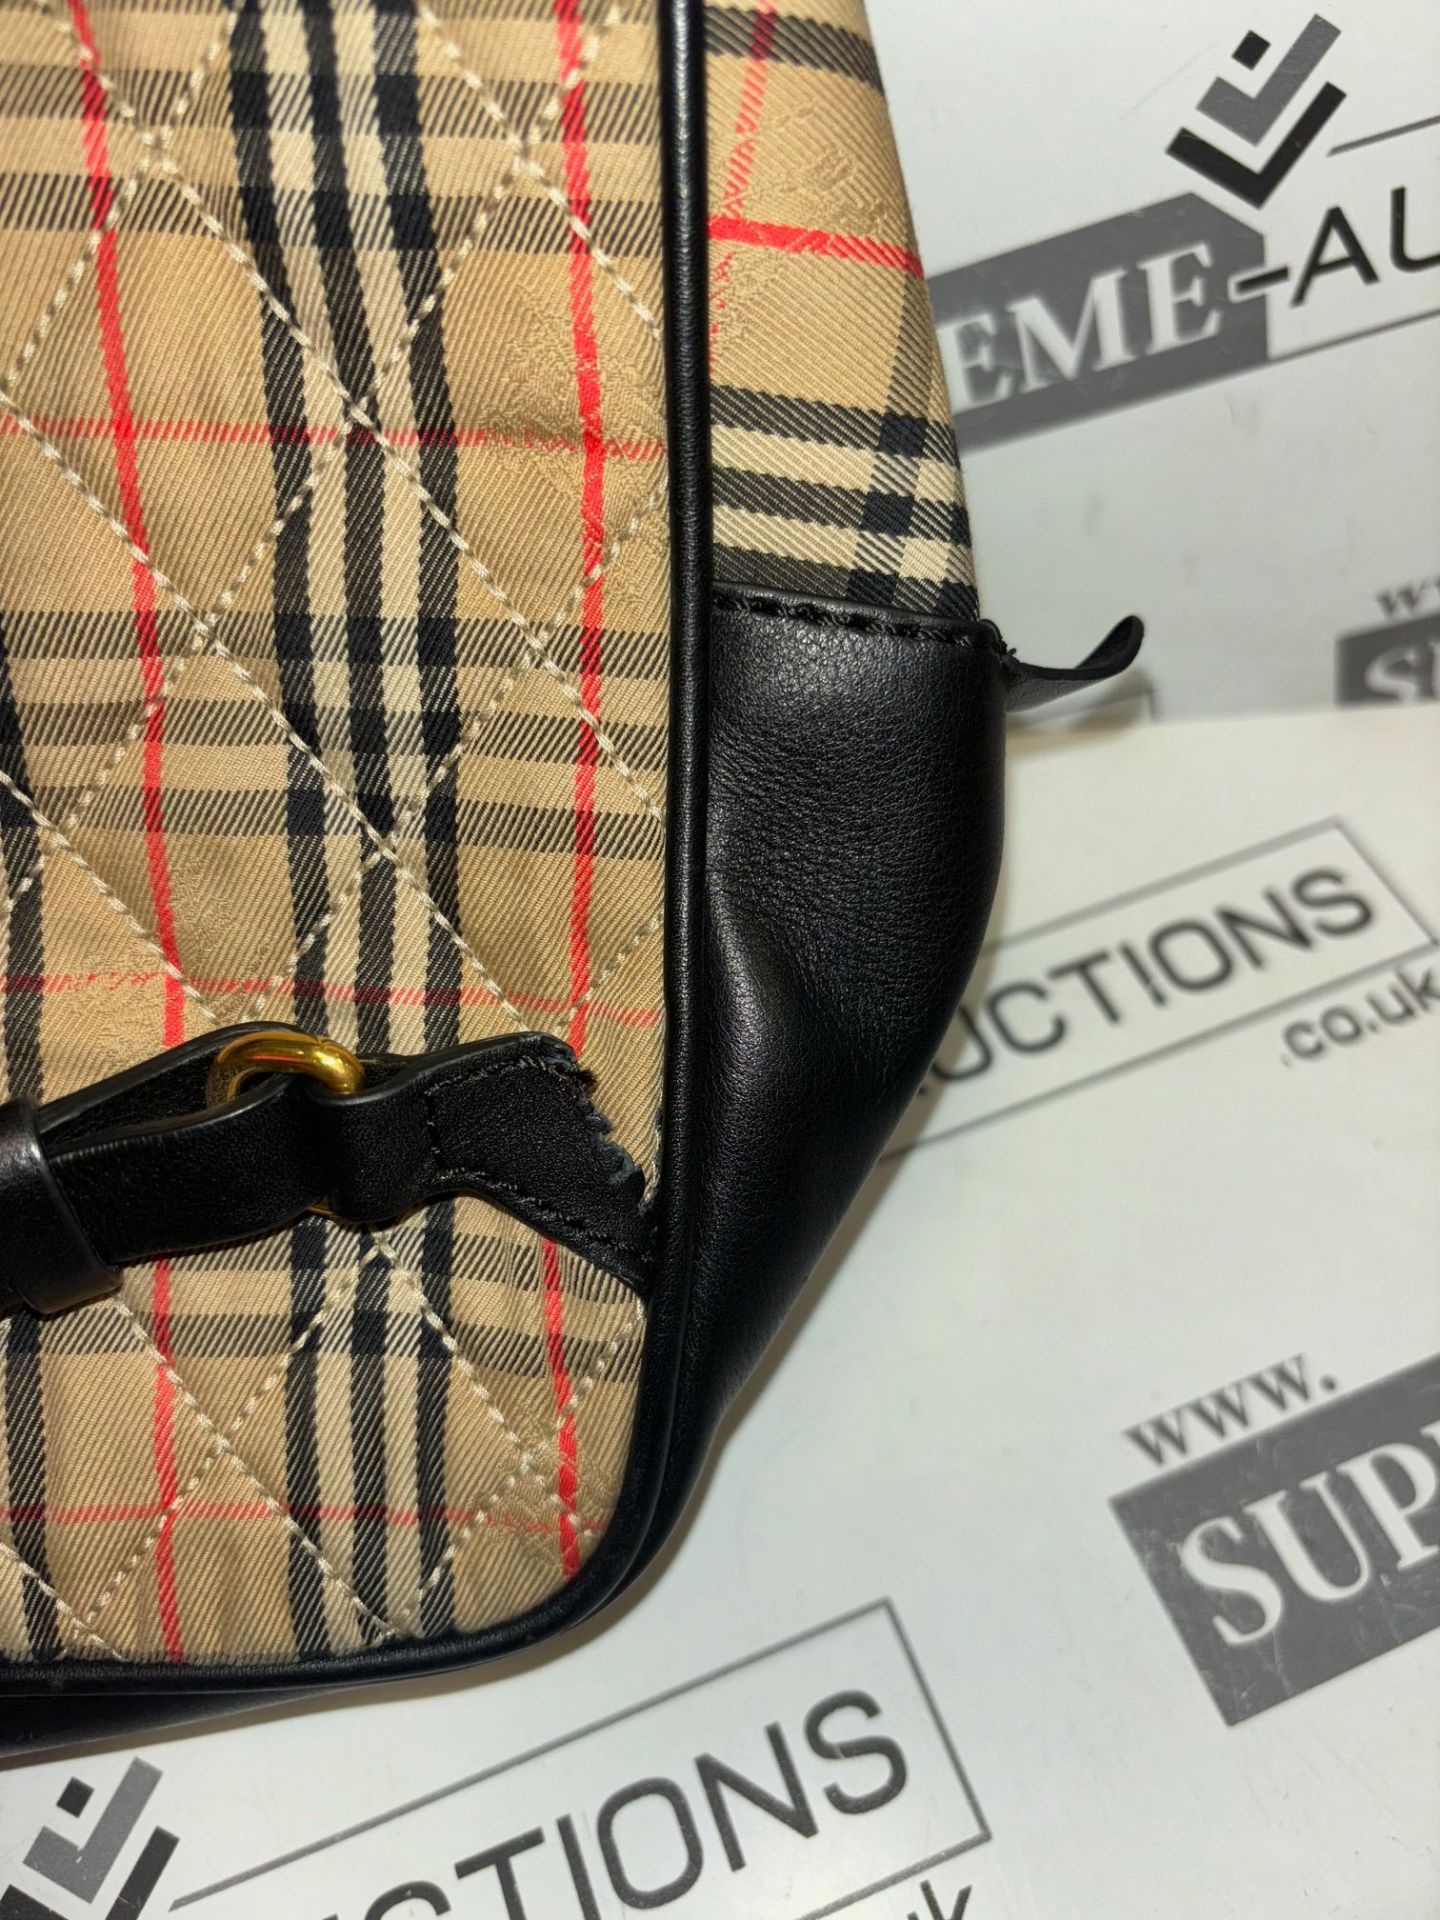 Burberry Link Backpack in Nova Check. 20x25cm. - Image 7 of 10